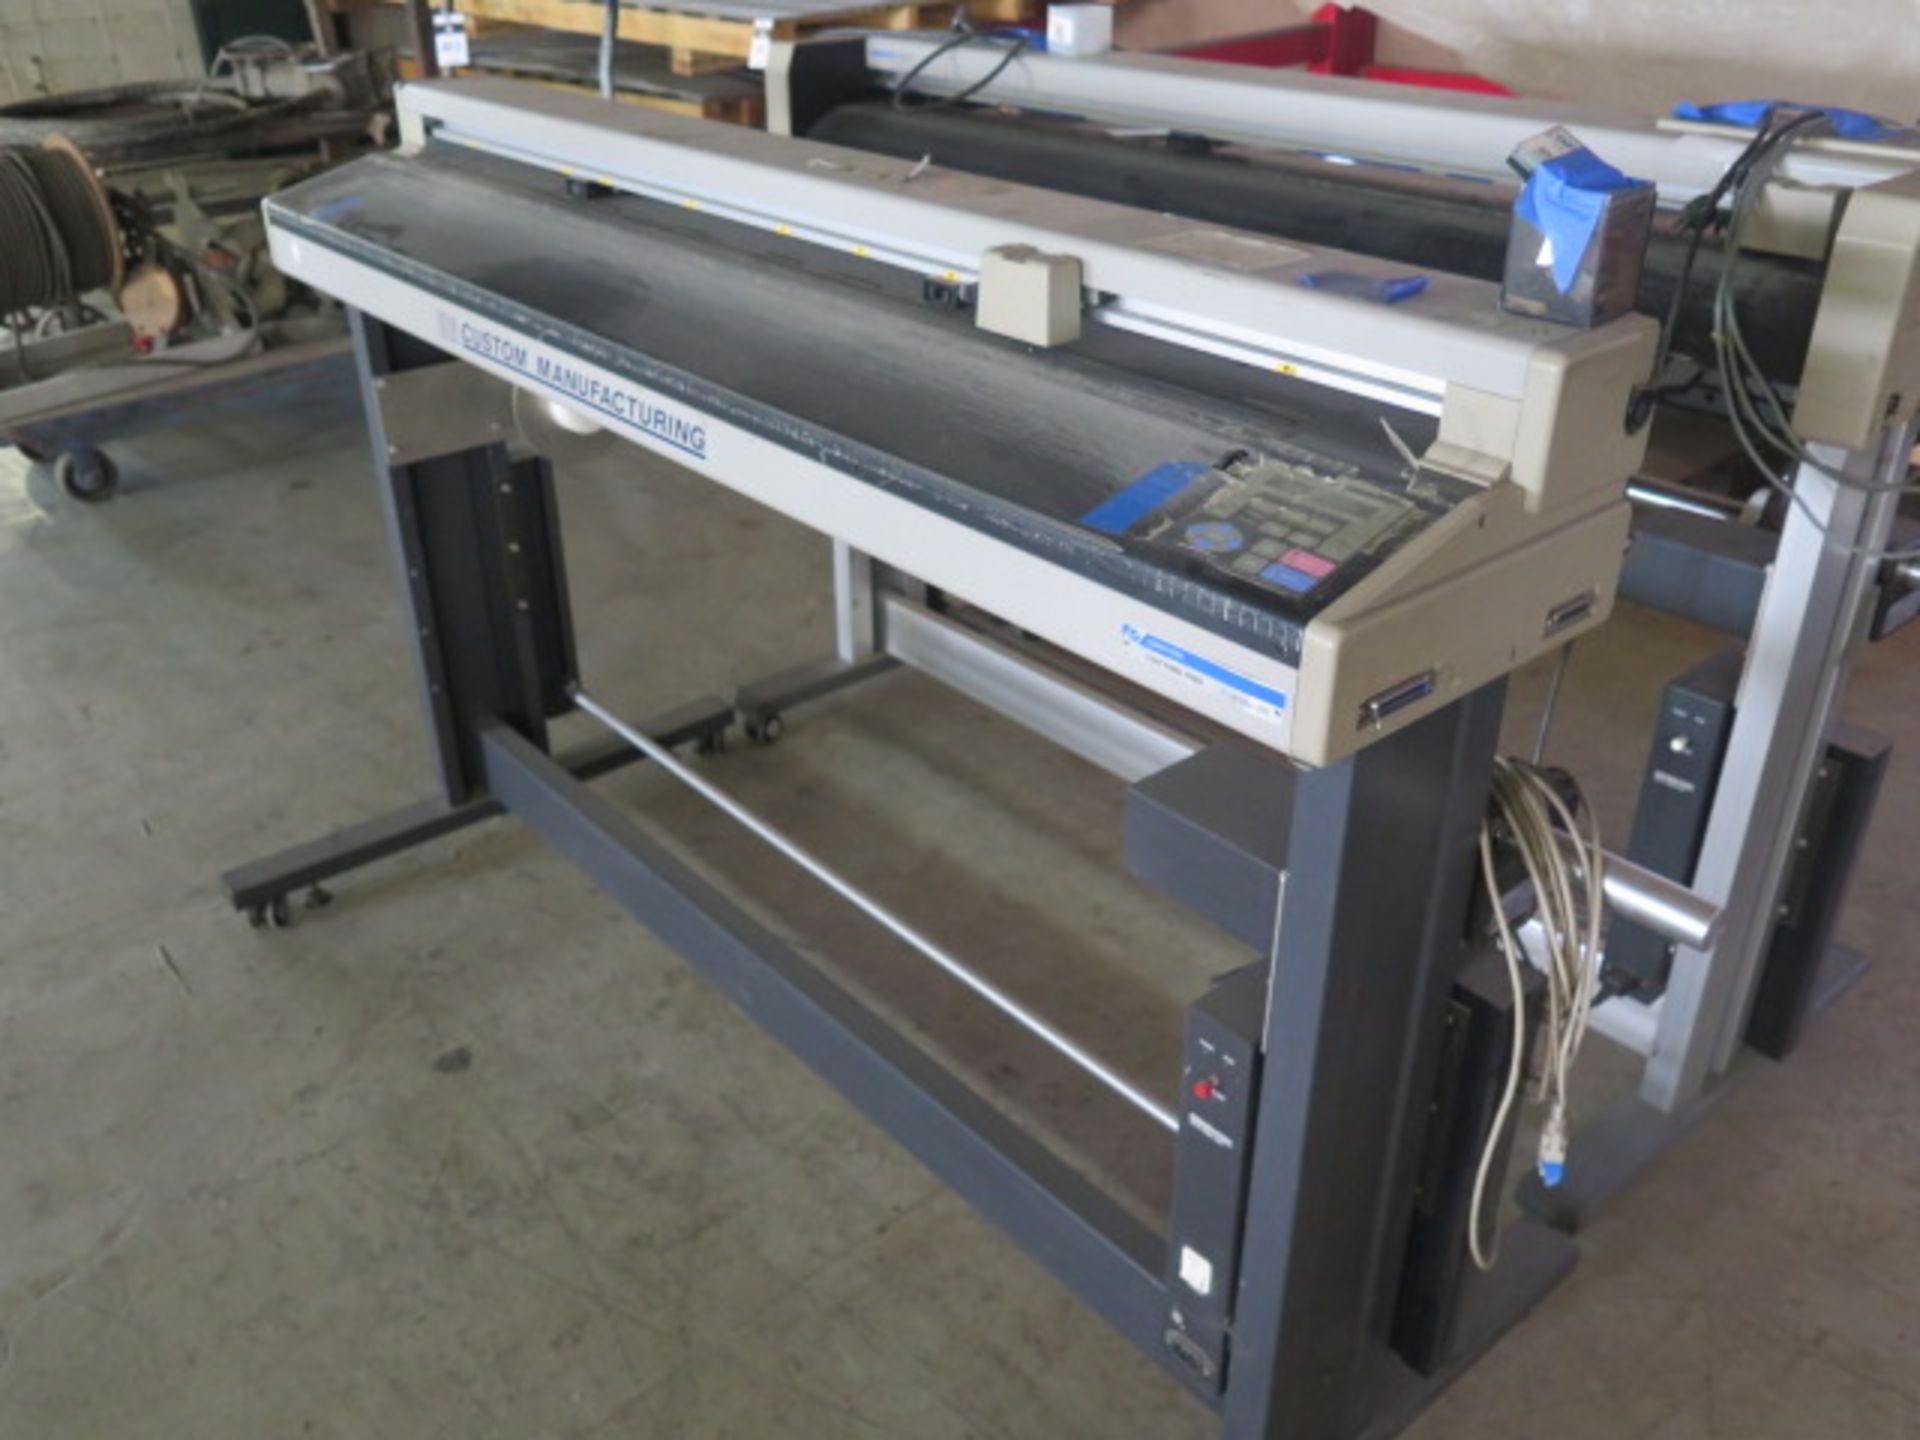 Graftec "Cutter Pro" FC2100-120 Cutter Plotter - Image 2 of 4